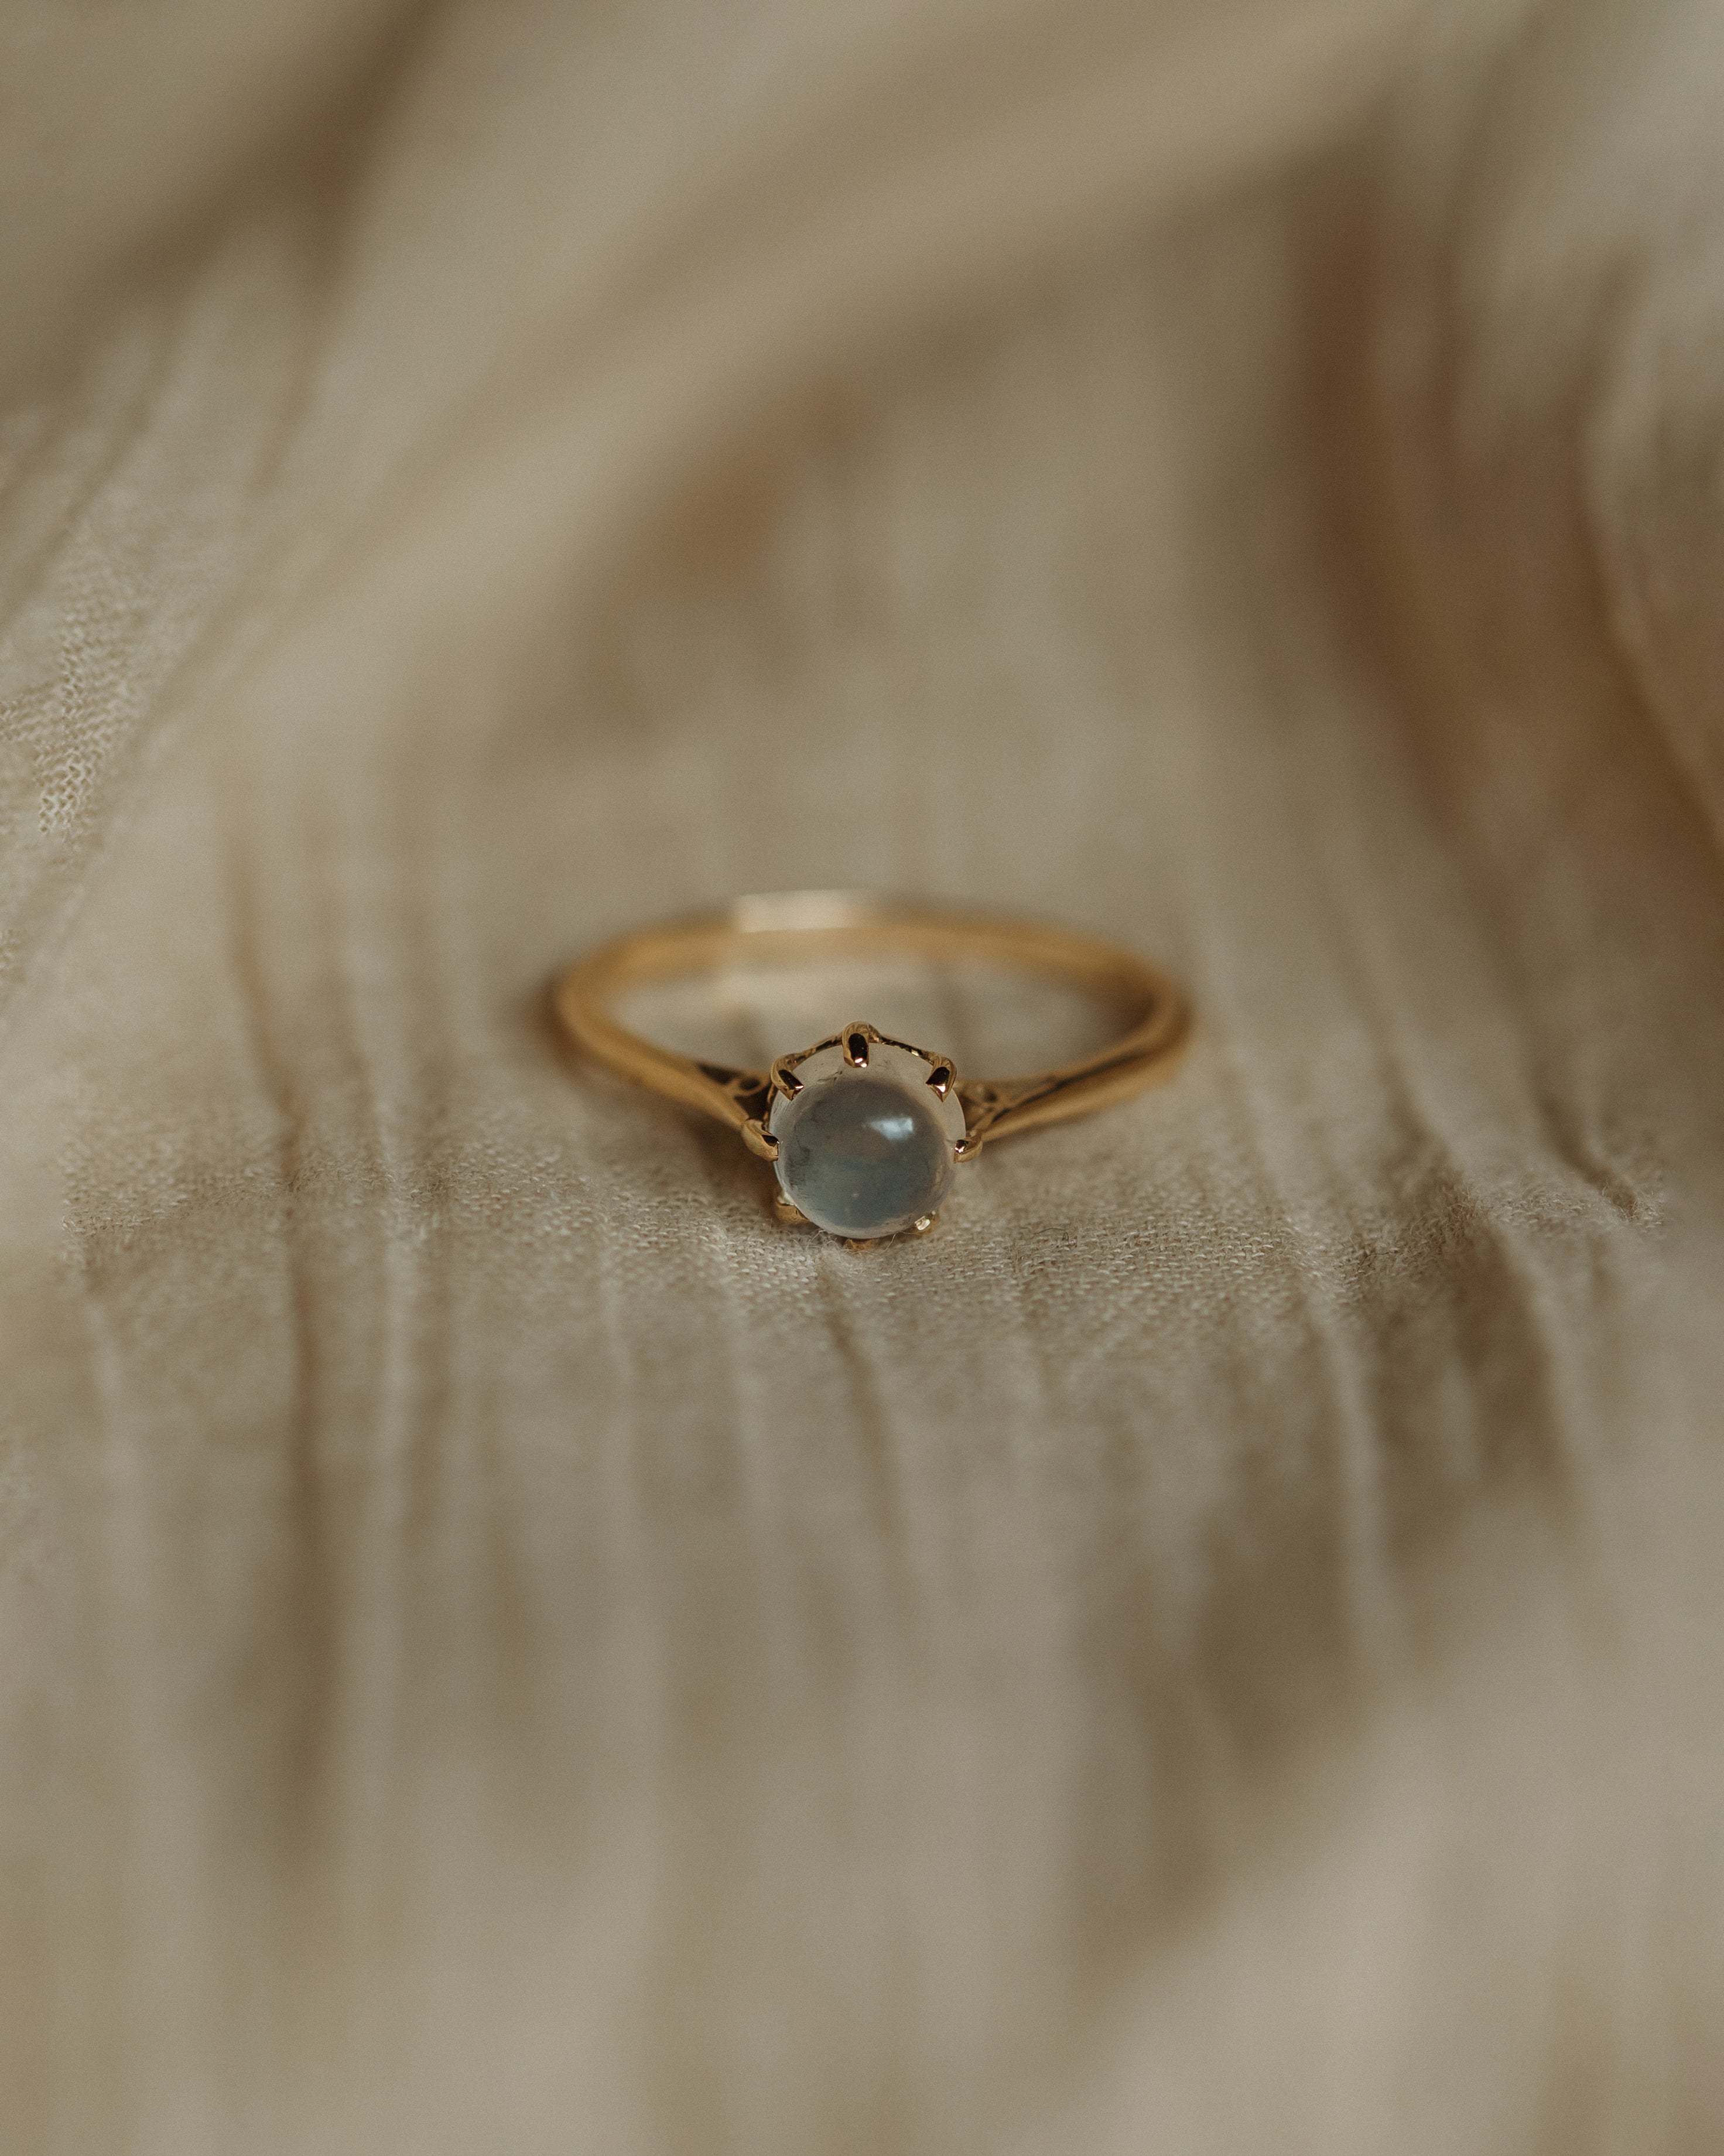 Marisol Vintage 9ct Gold Moonstone Solitaire Ring